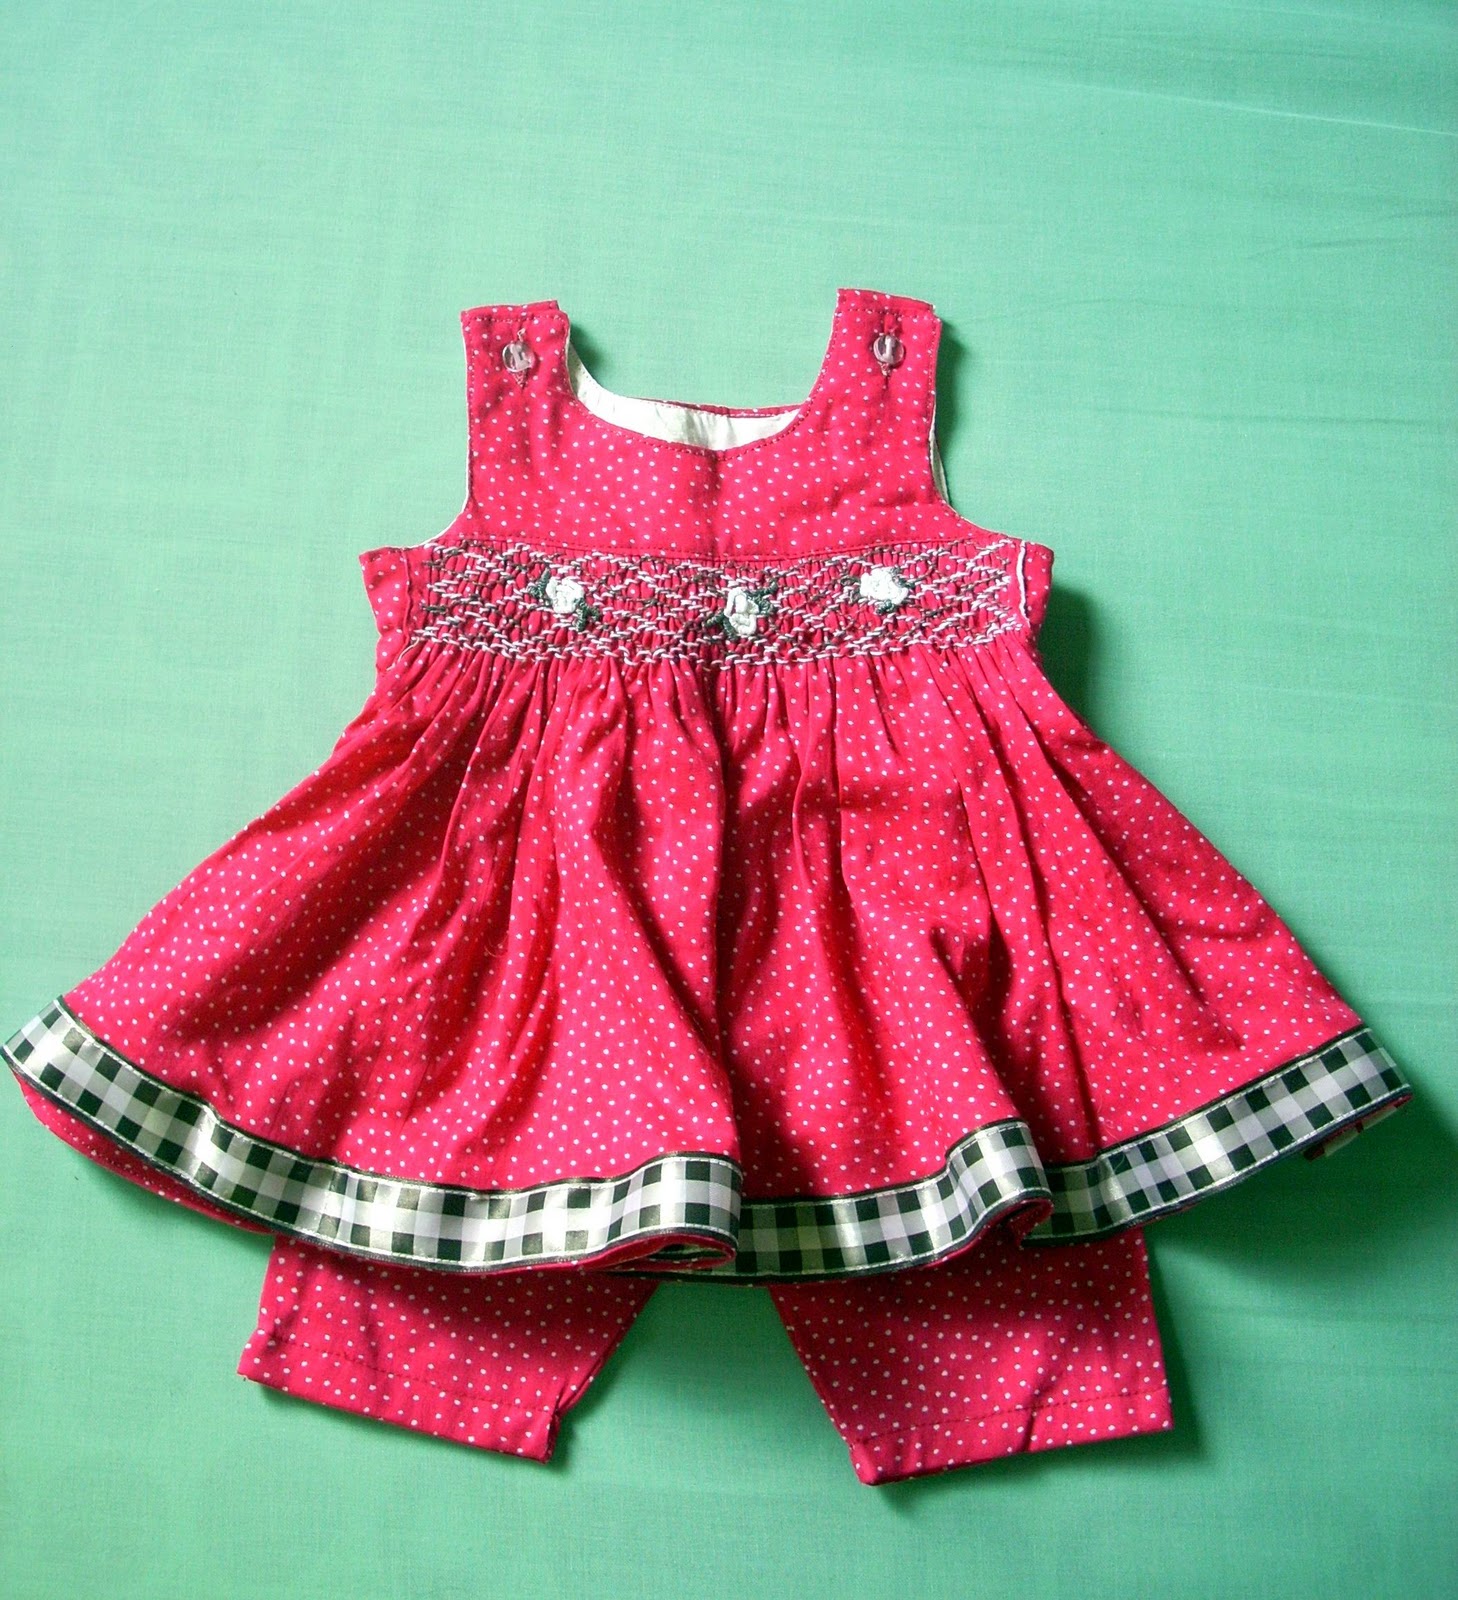 Umme Yusuf: Month of Sewing: A Smocked Baby Dress and A Frillied Romper